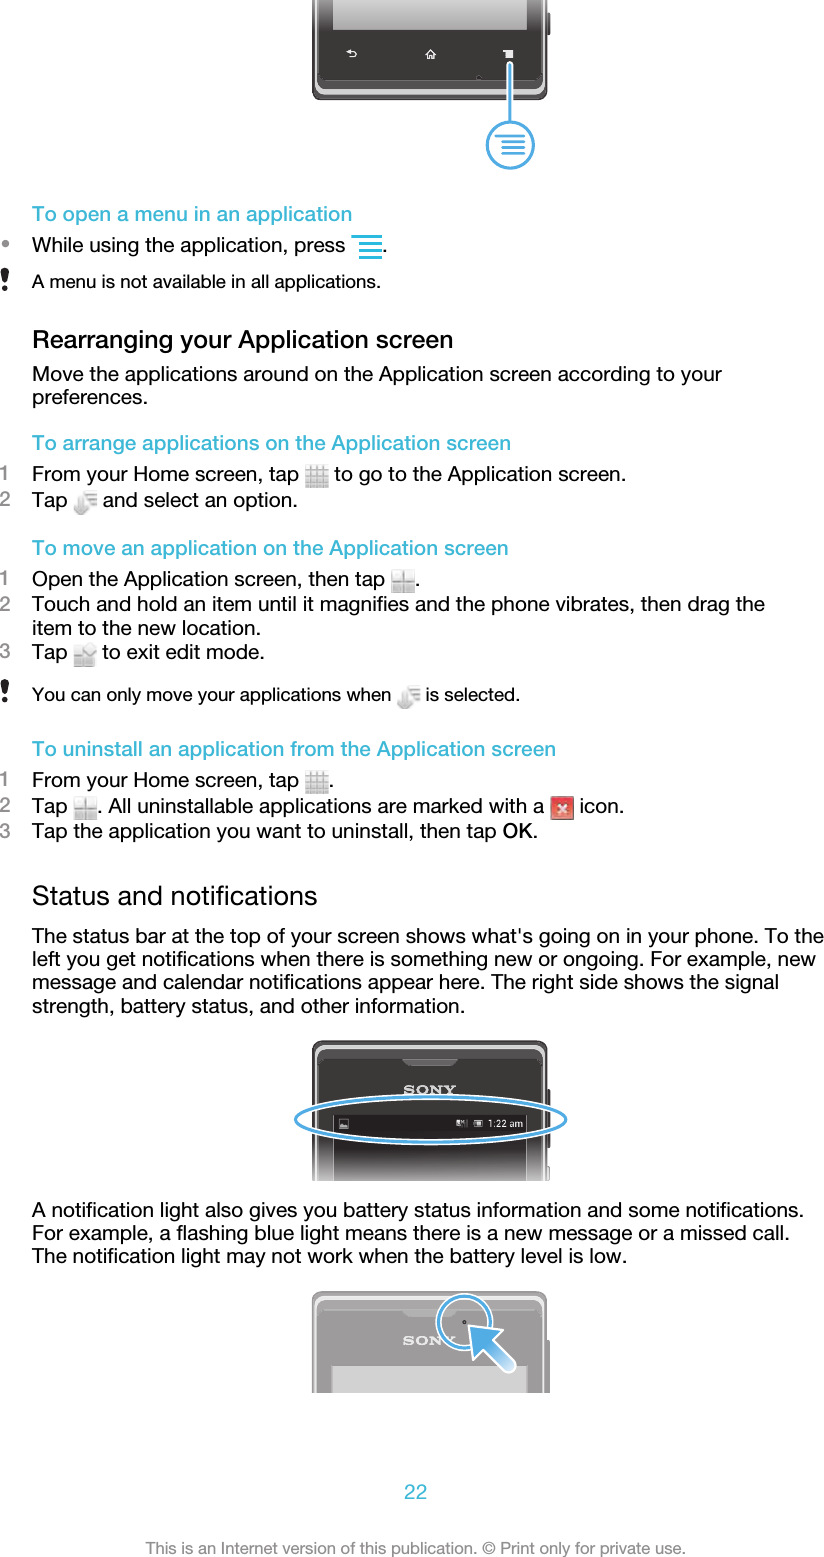 To open a menu in an application•While using the application, press  .A menu is not available in all applications.Rearranging your Application screenMove the applications around on the Application screen according to yourpreferences.To arrange applications on the Application screen1From your Home screen, tap   to go to the Application screen.2Tap   and select an option.To move an application on the Application screen1Open the Application screen, then tap  .2Touch and hold an item until it magnifies and the phone vibrates, then drag theitem to the new location.3Tap   to exit edit mode.You can only move your applications when   is selected.To uninstall an application from the Application screen1From your Home screen, tap  .2Tap  . All uninstallable applications are marked with a   icon.3Tap the application you want to uninstall, then tap OK.Status and notificationsThe status bar at the top of your screen shows what&apos;s going on in your phone. To theleft you get notifications when there is something new or ongoing. For example, newmessage and calendar notifications appear here. The right side shows the signalstrength, battery status, and other information.A notification light also gives you battery status information and some notifications.For example, a flashing blue light means there is a new message or a missed call.The notification light may not work when the battery level is low.22This is an Internet version of this publication. © Print only for private use.